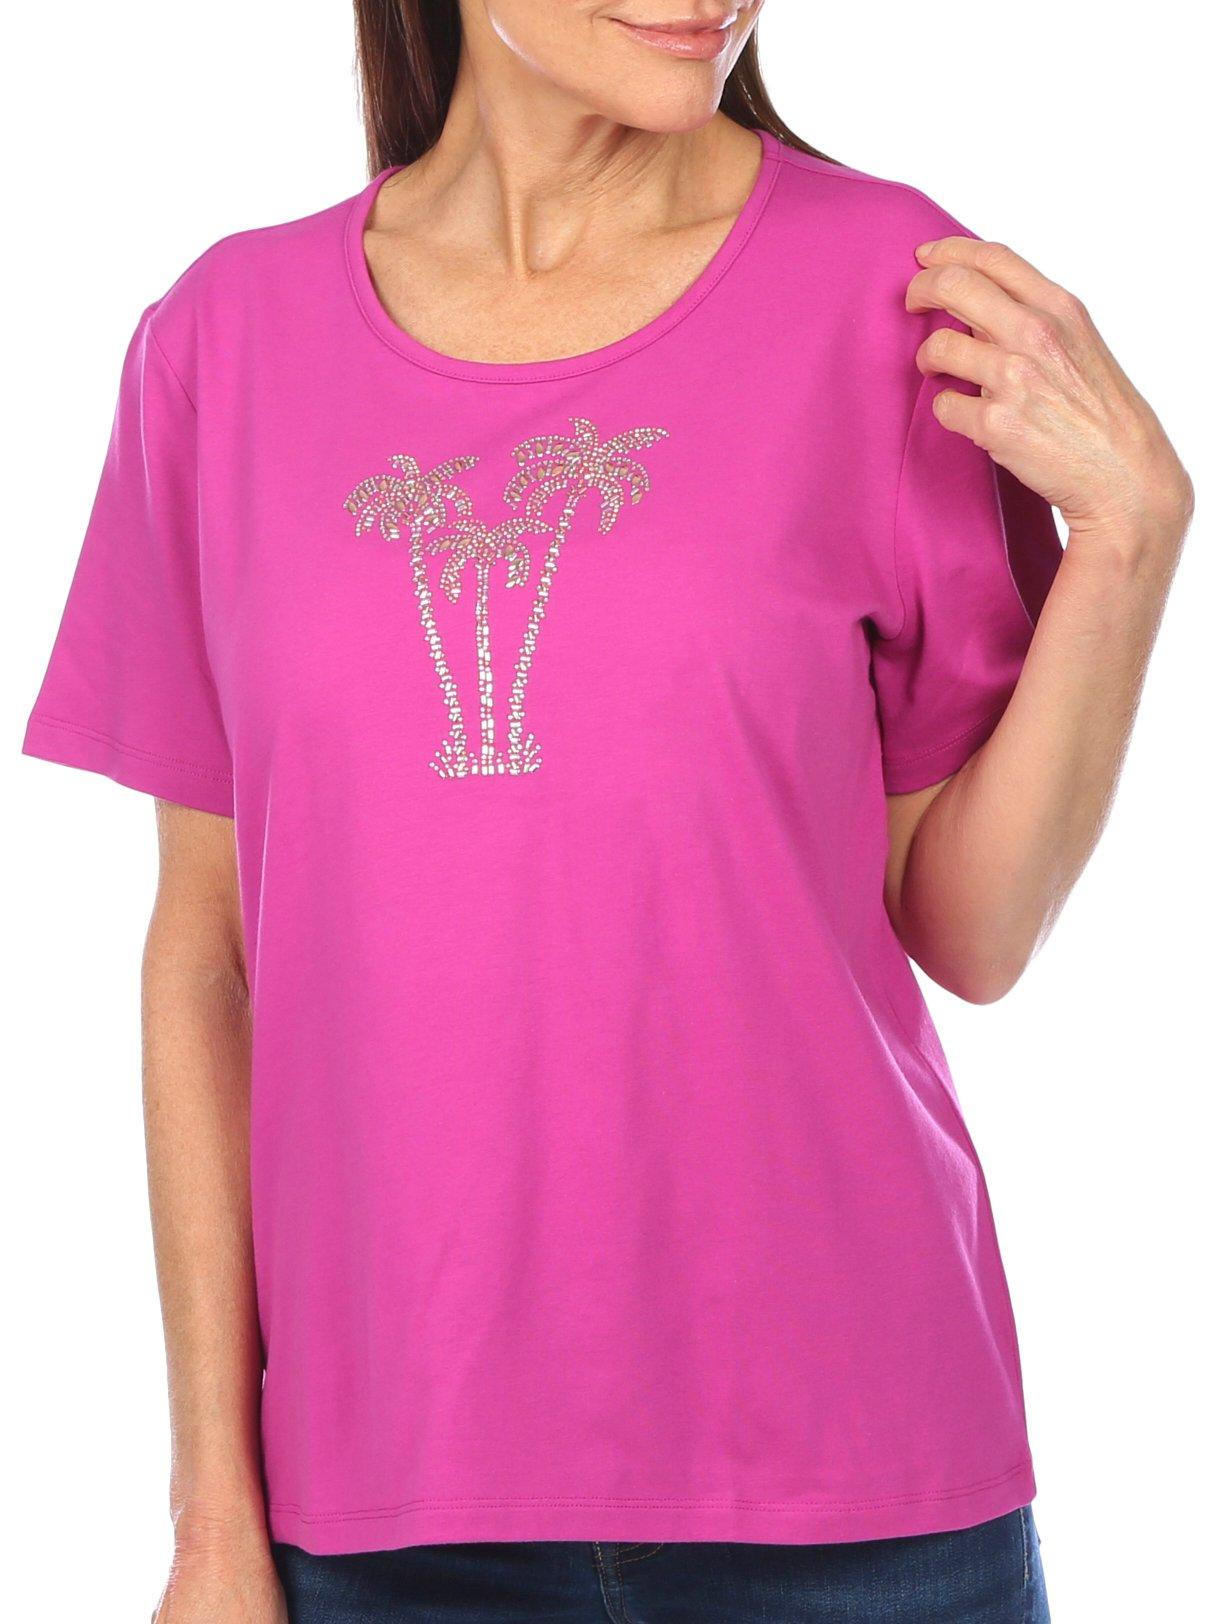 Coral Bay Petite Embellished Palm Trees Short Sleeve Top